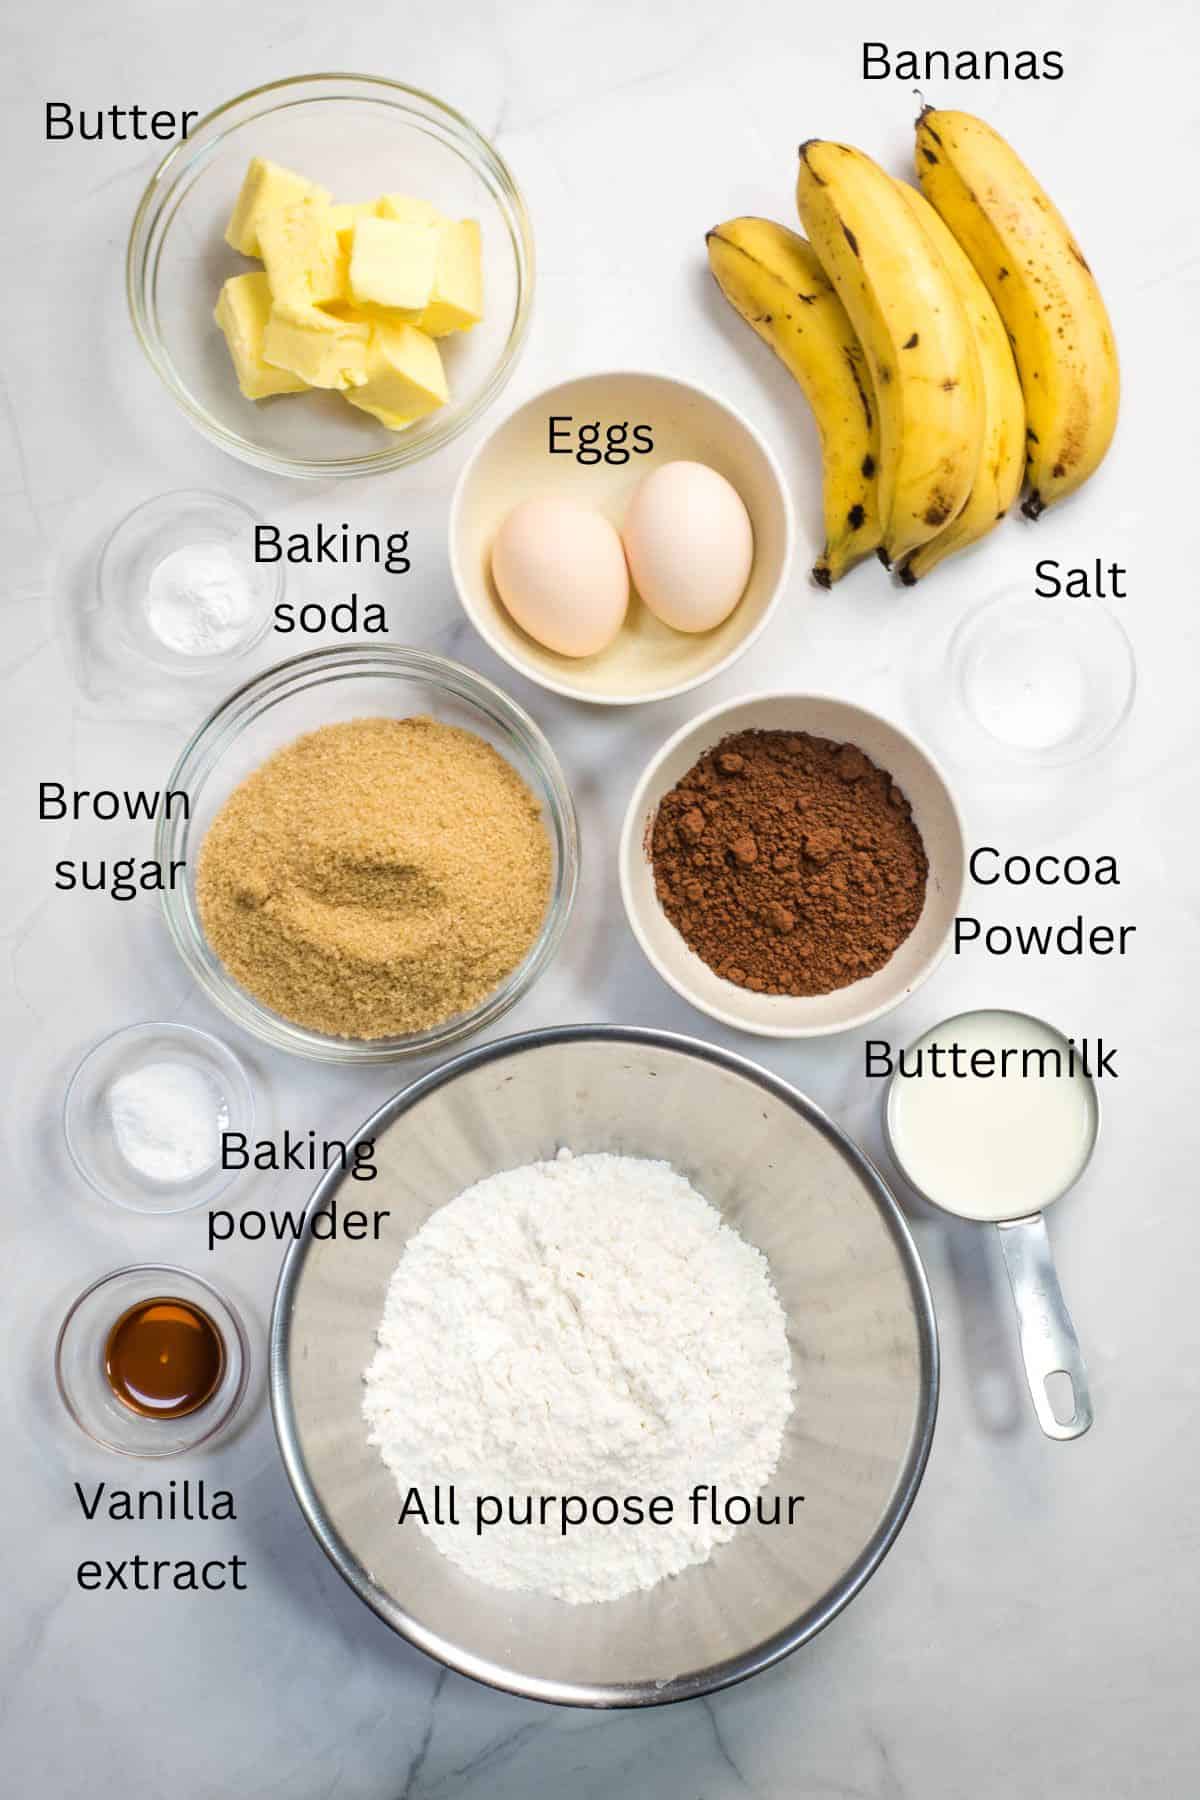 All purpose flour, brown sugar, eggs, cocoa powder, bananas, buttermilk, salt, baking powder, baking soda and vanilla extract in small bowls against a marble background.